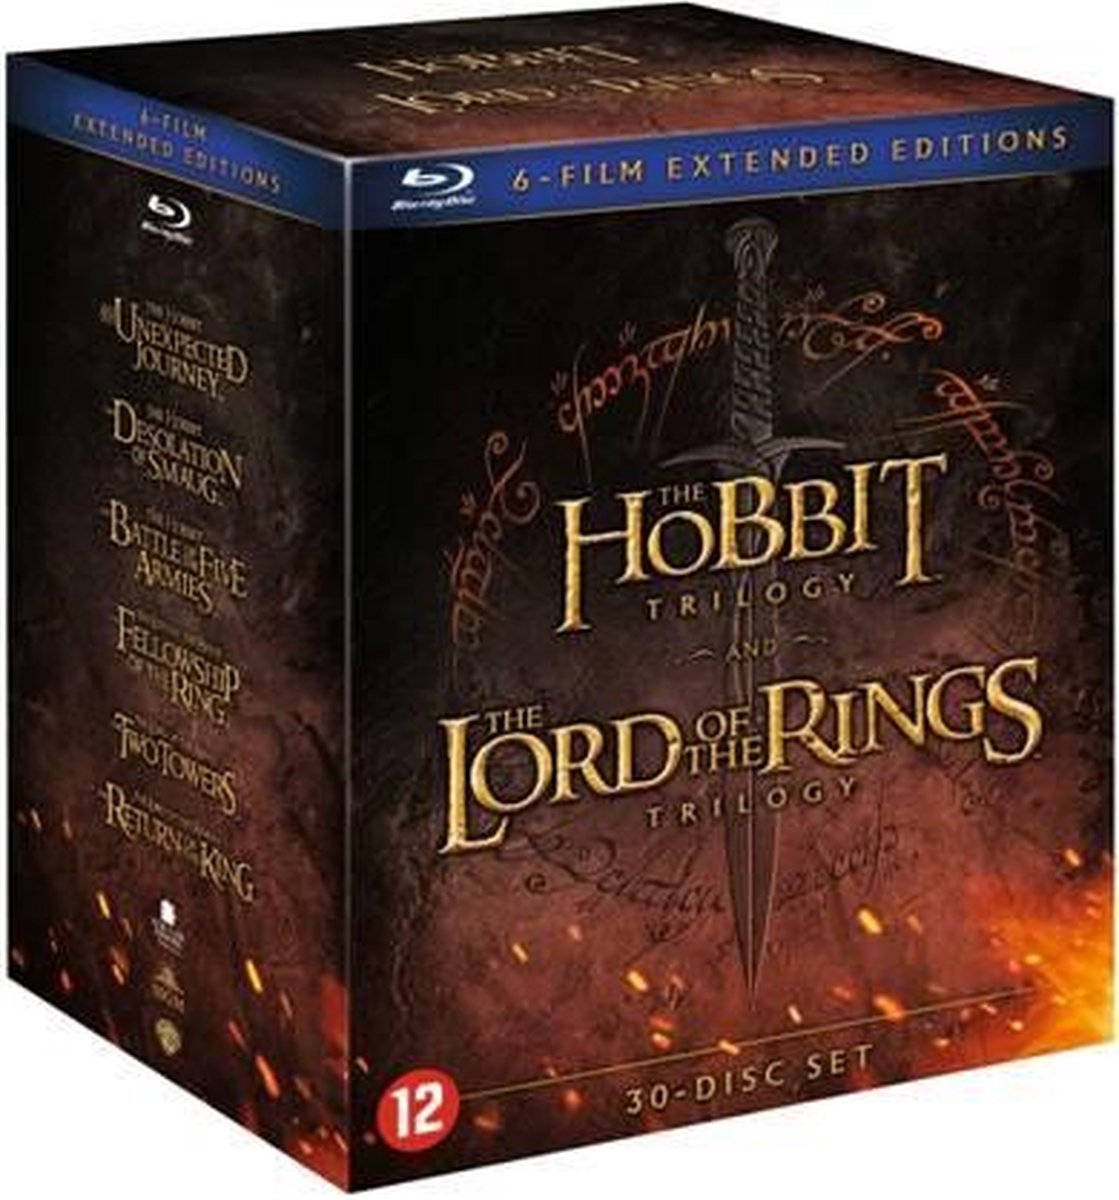 Hobbit & Lord Of The Rings Trilogy (Blu-ray) (Extended Edition) - Movie